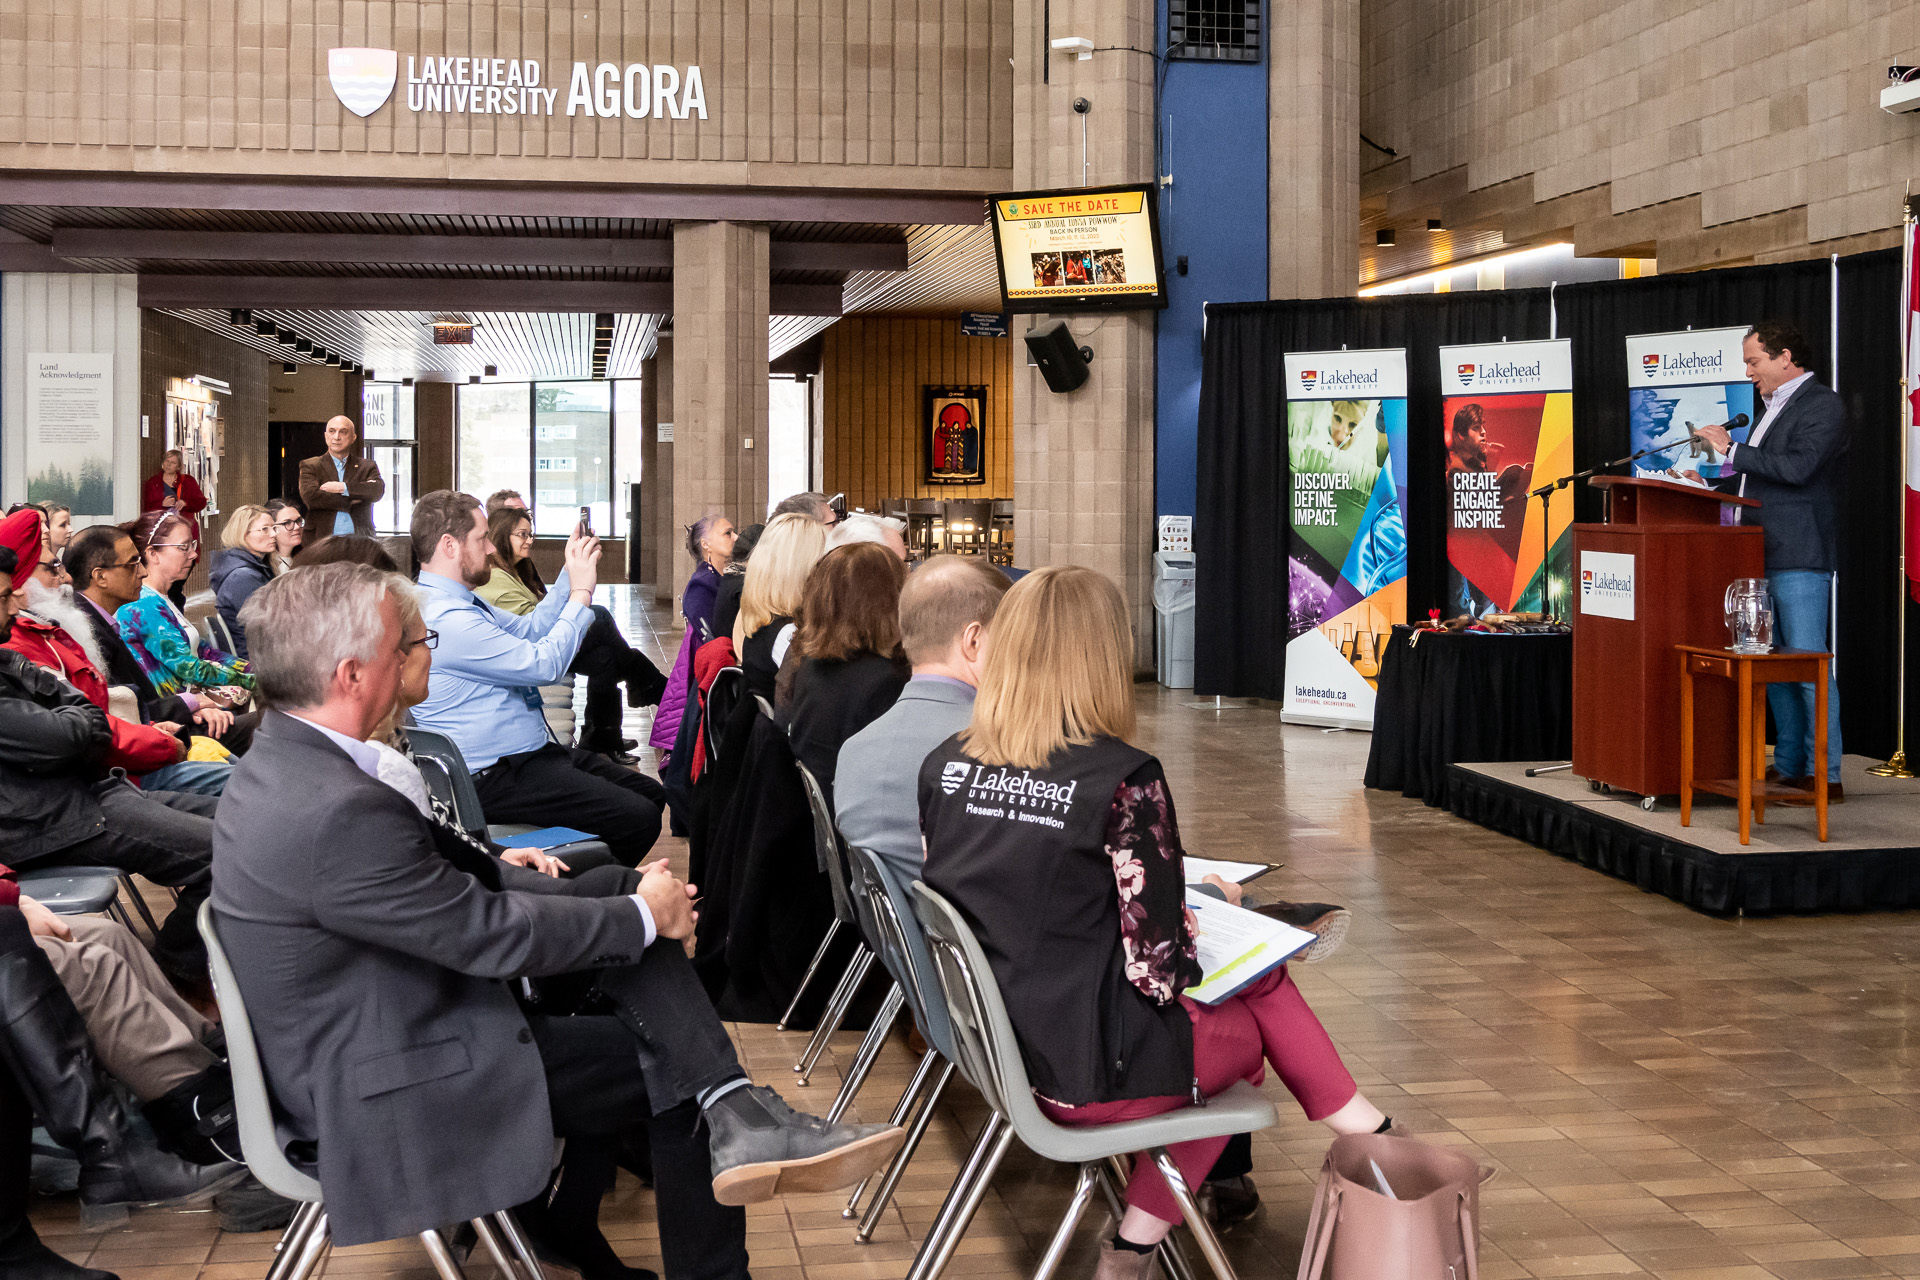 Visitors celebrate the Opening Ceremonies of Research and Innovation Week in the Agora